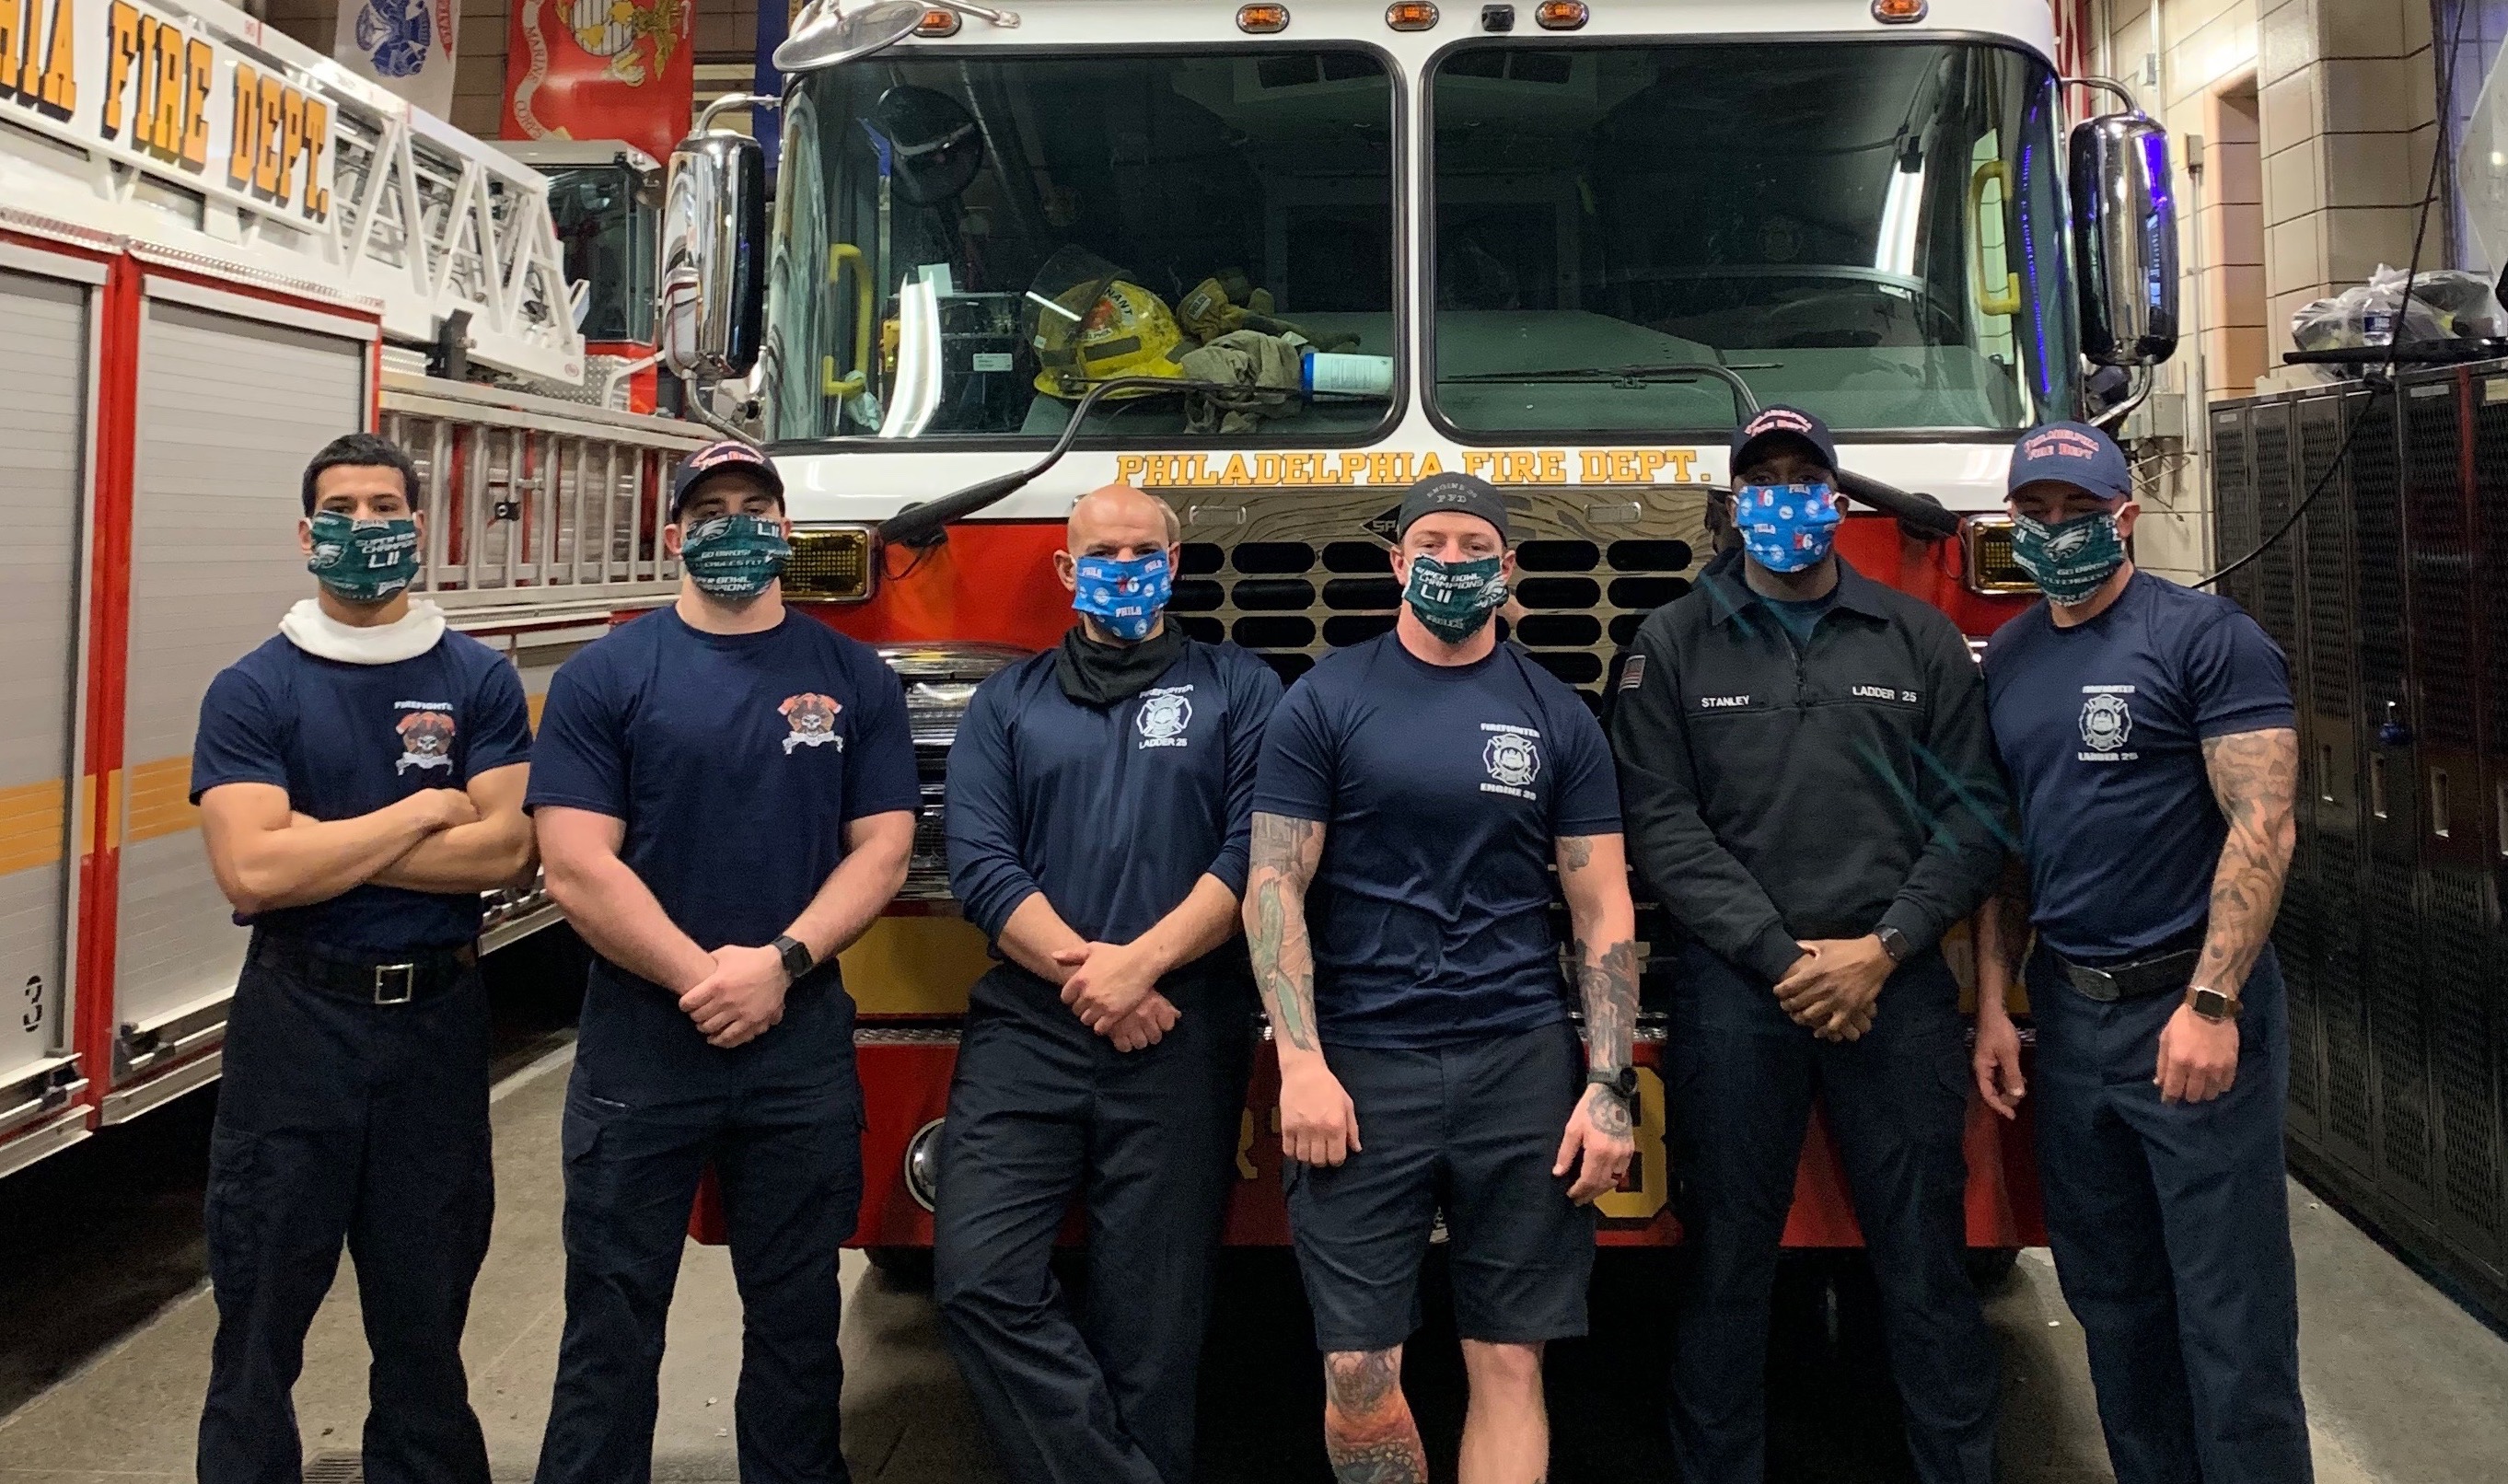 Fire fighters wearing masks stand in front of a fire truck